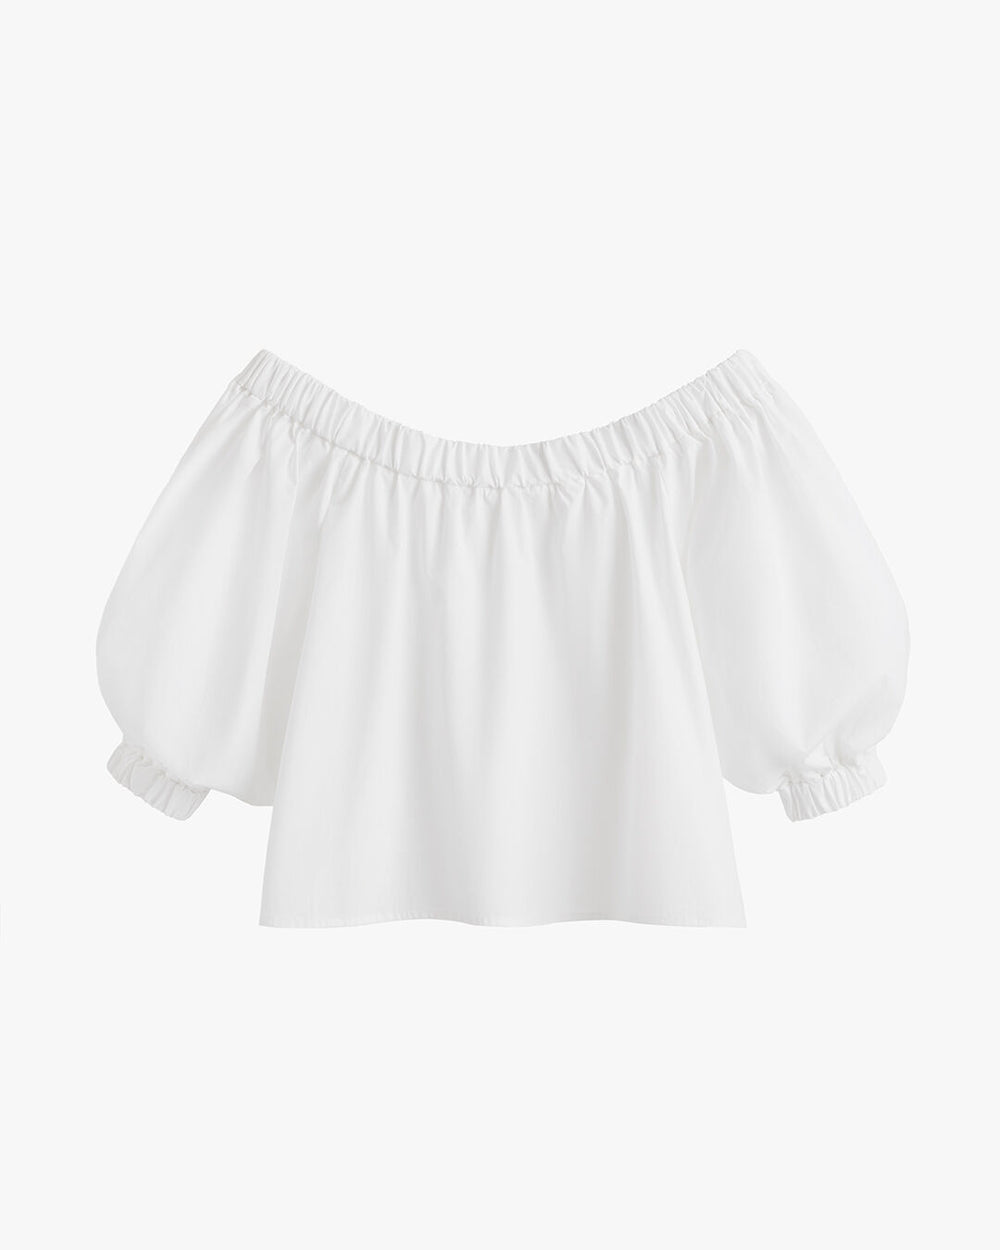 Off-shoulder blouse with elastic neckline and puffed sleeves.